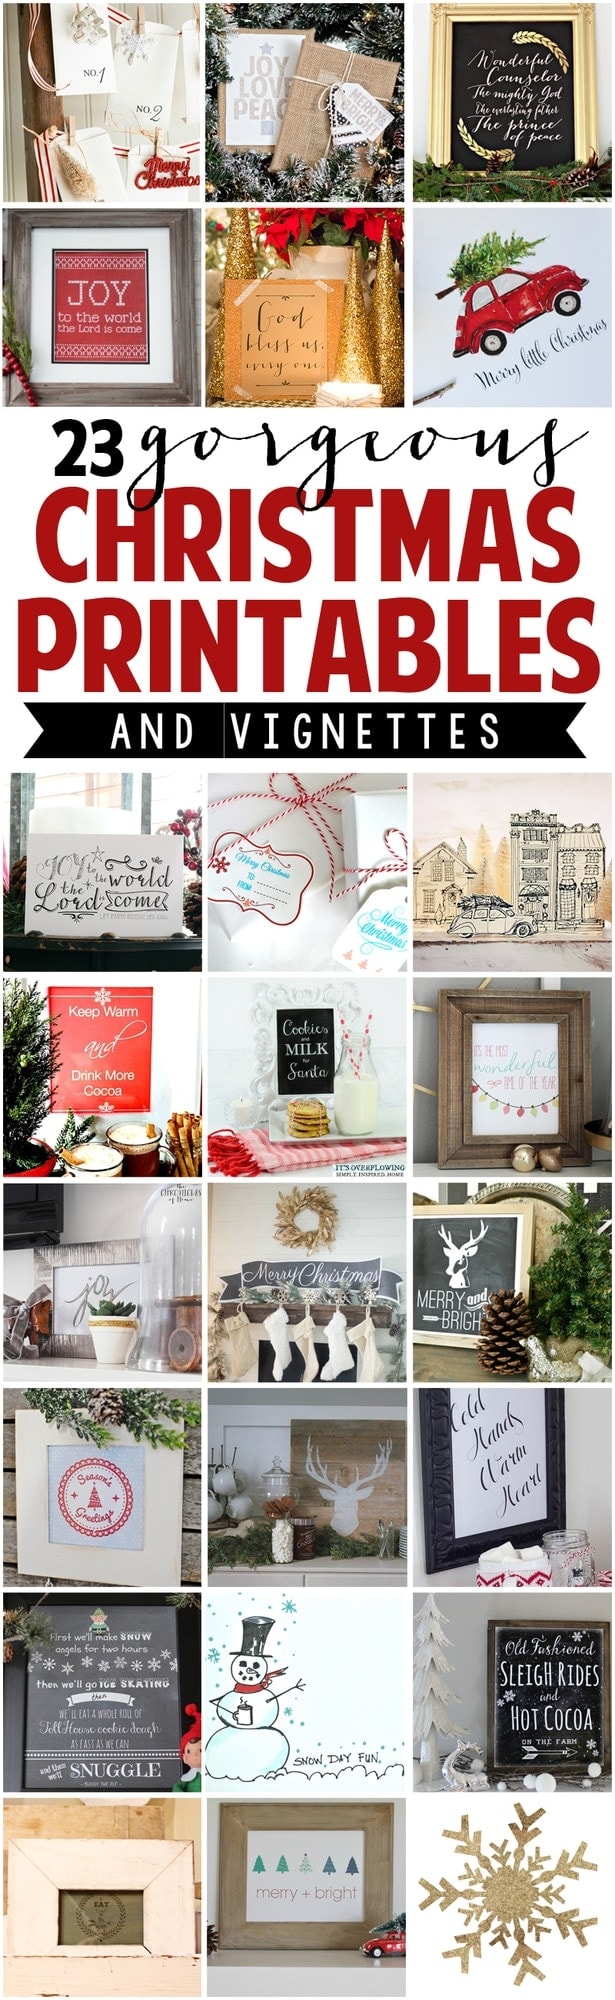 23 Gorgeous Christmas Printables with Vignettes and Display Ideas | DIY Christmas